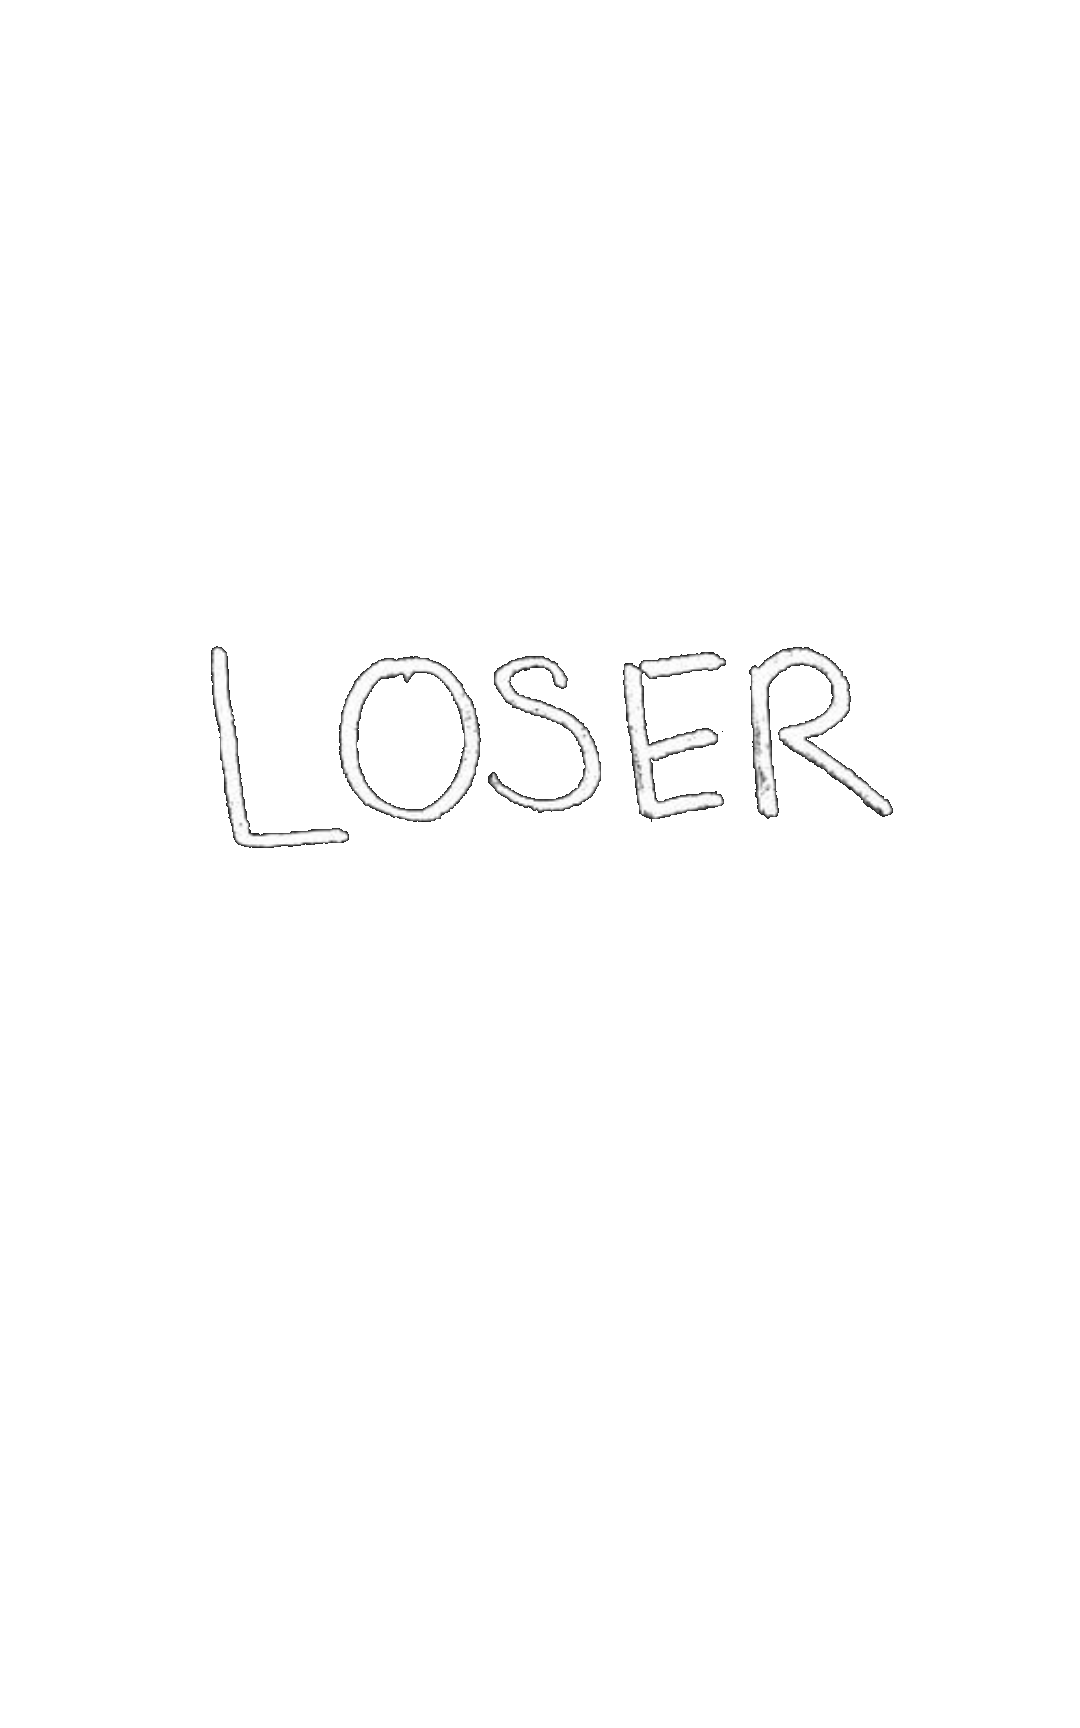 loser text freetoedit #loser #text sticker by @bluexxoo